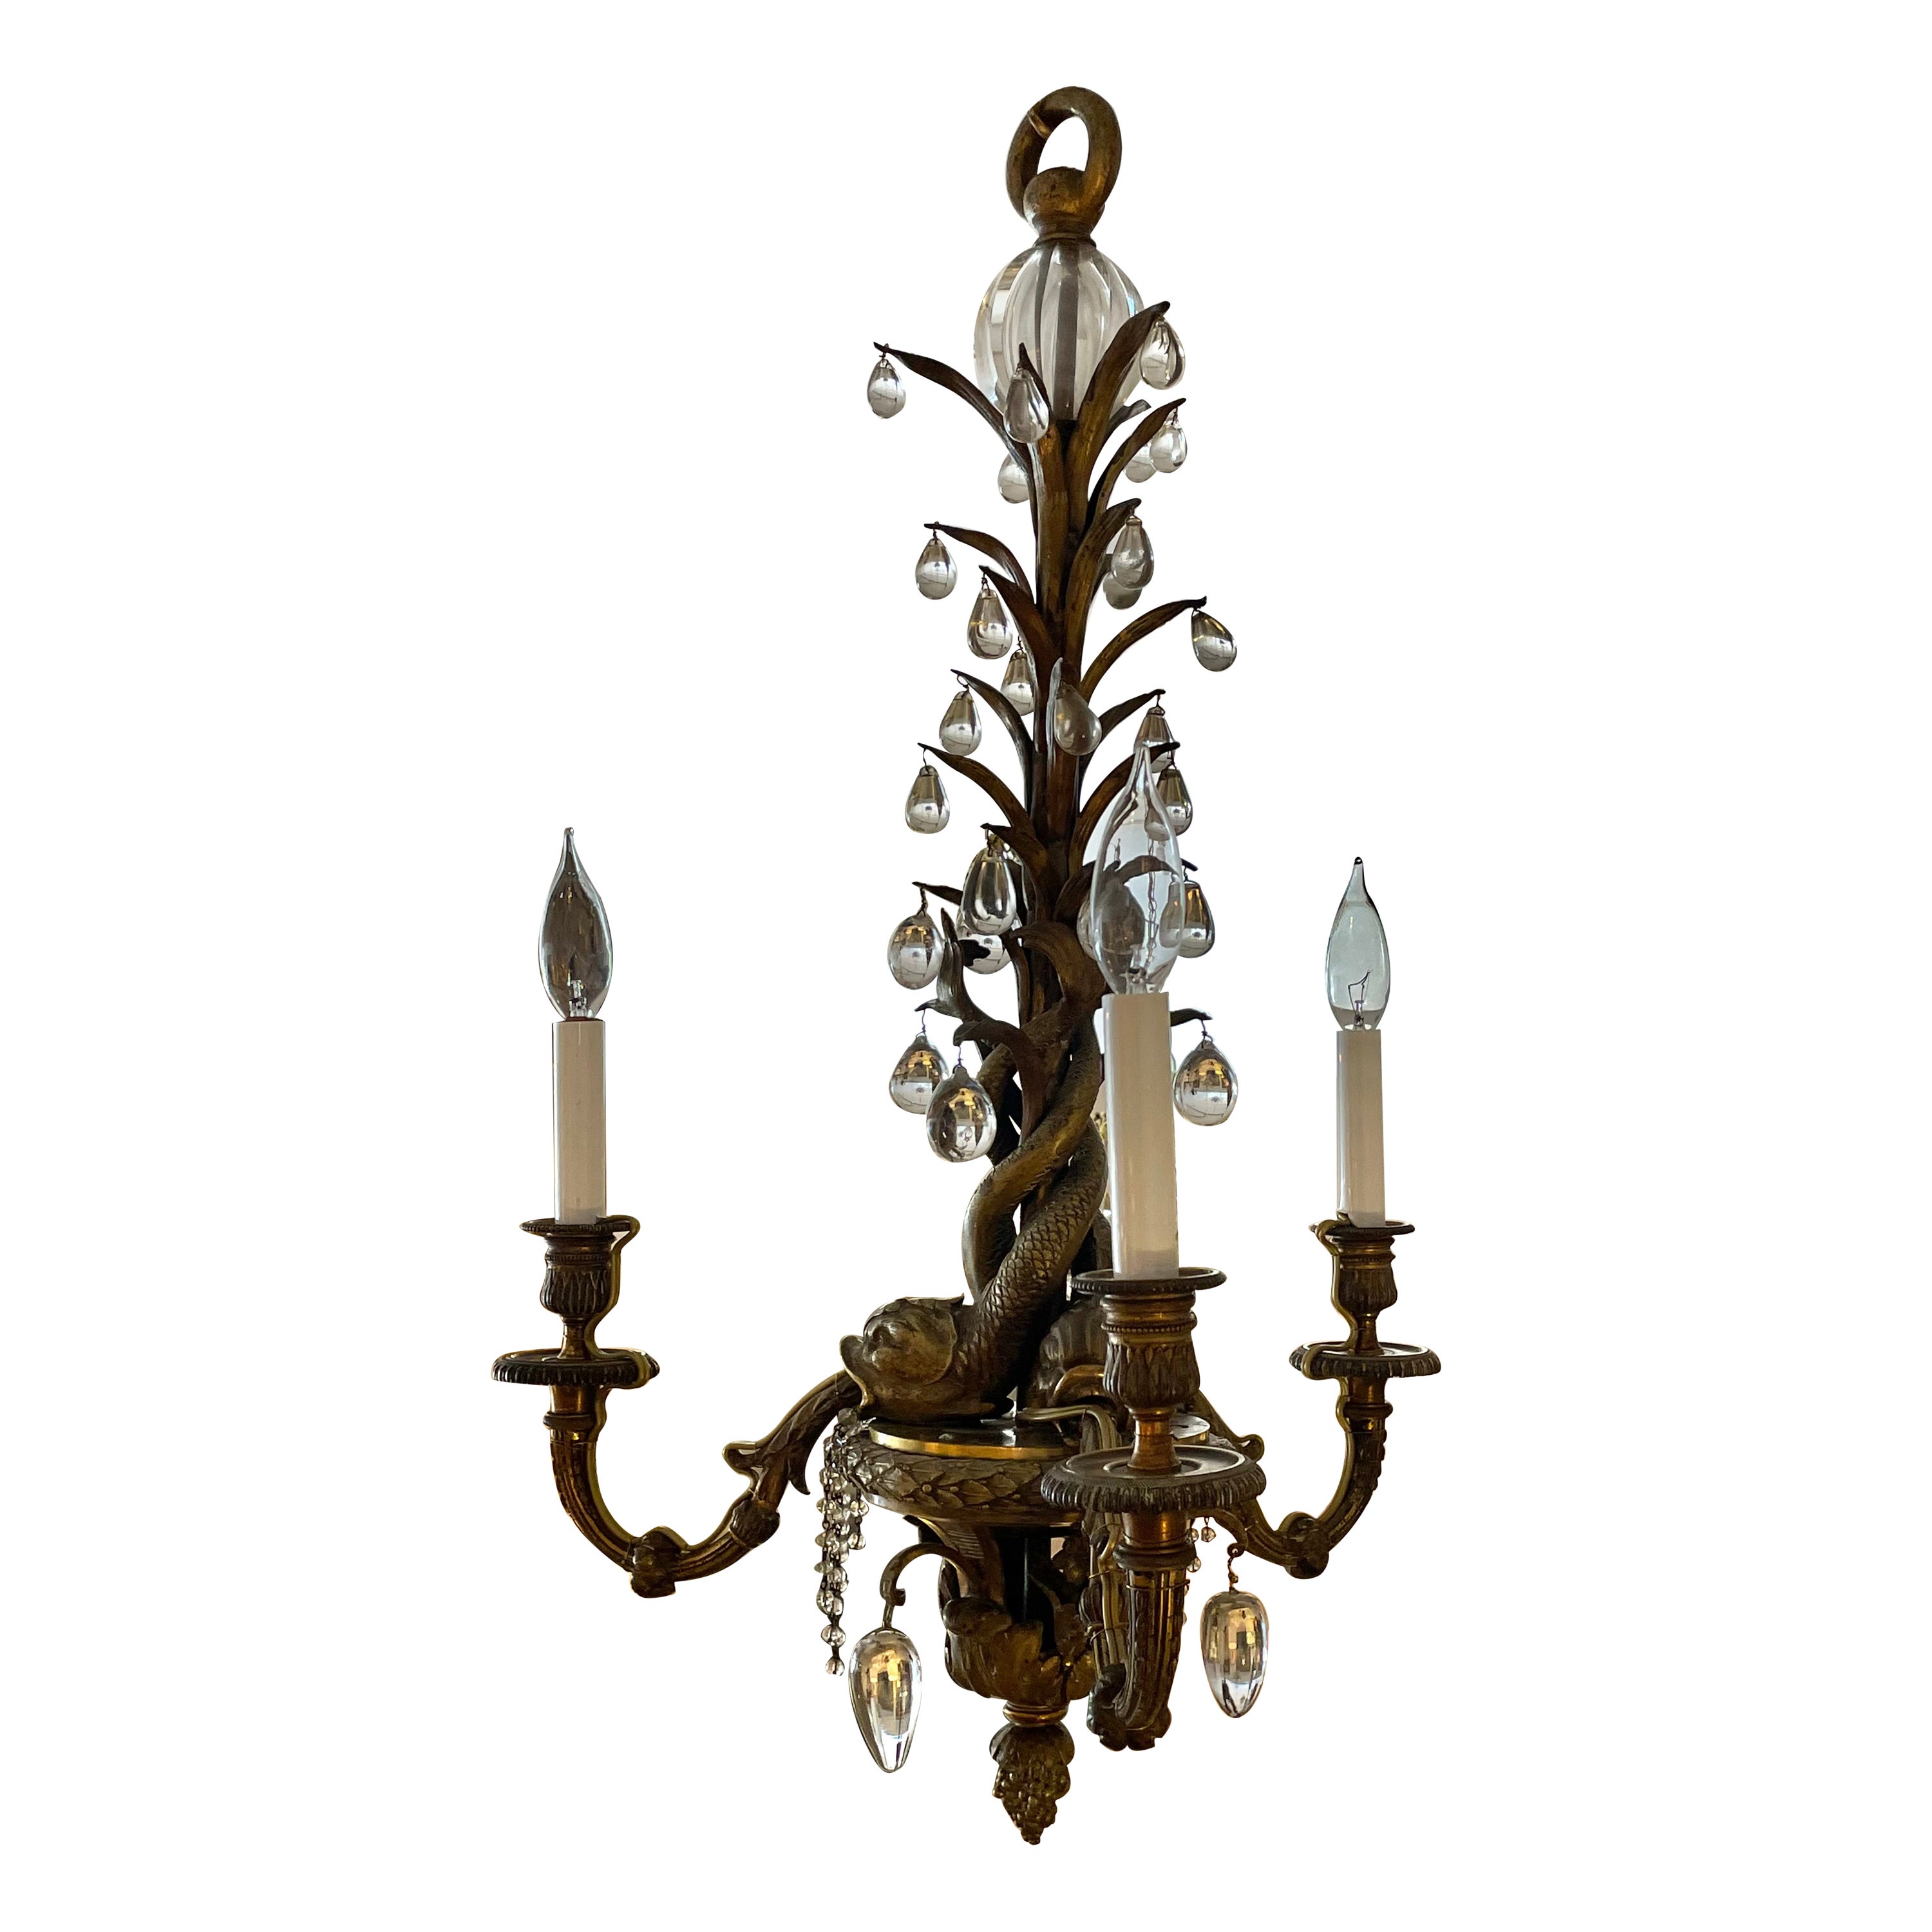 Bronze Chandelier with Dolphin Figures Style of Maison Jansen